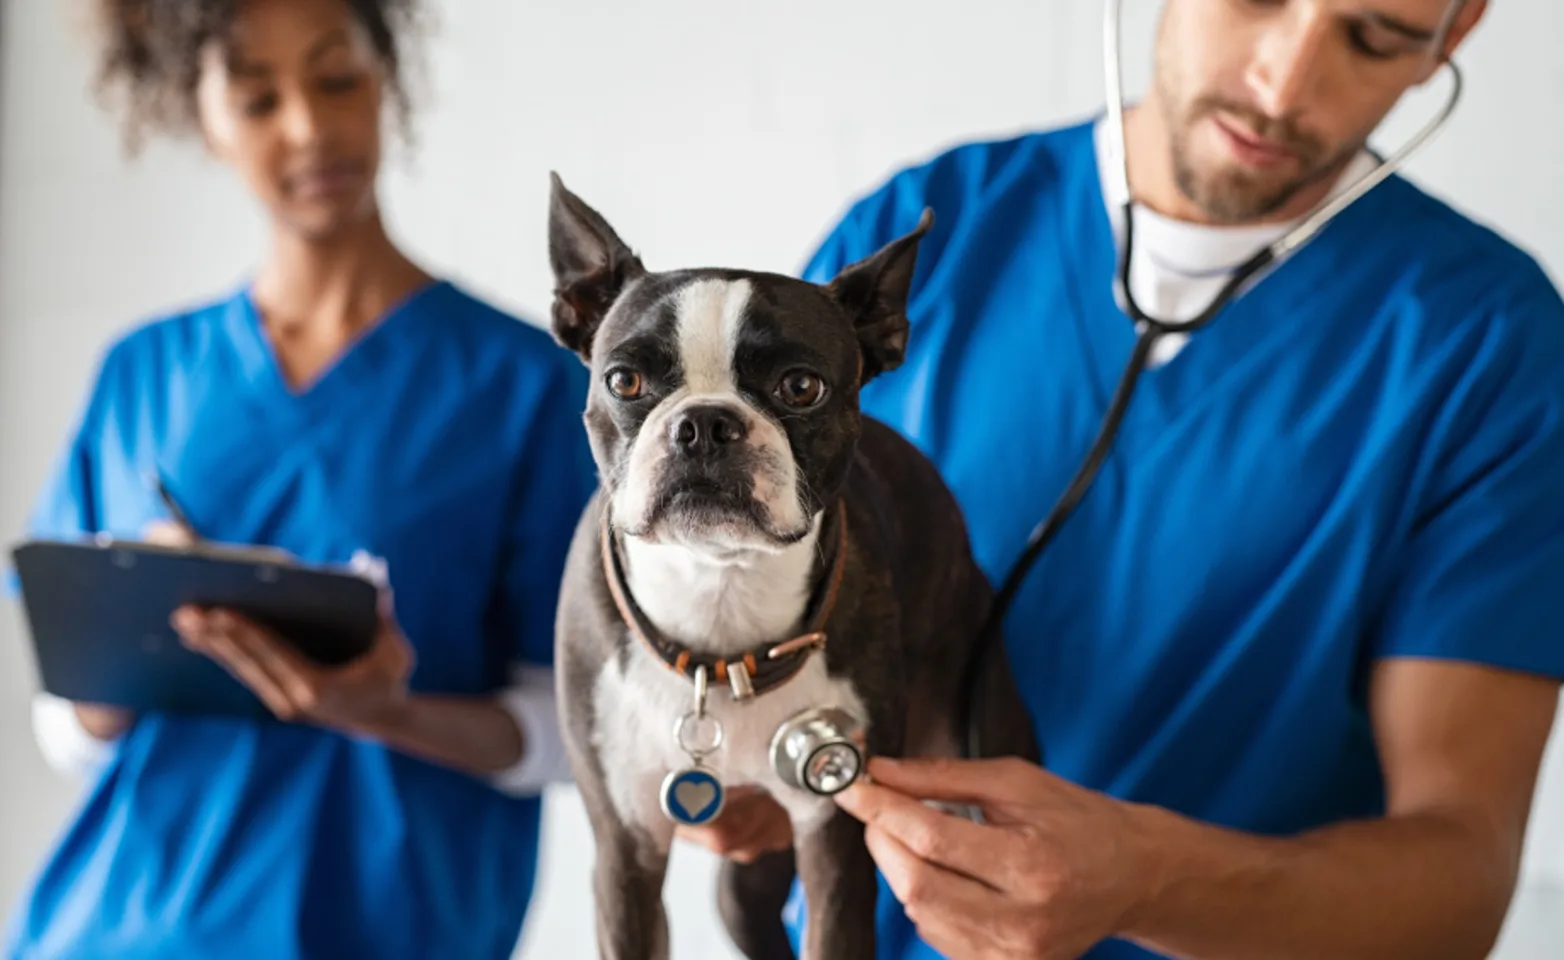 Dog having its heartbeat checked by a doctor with a stethoscope.